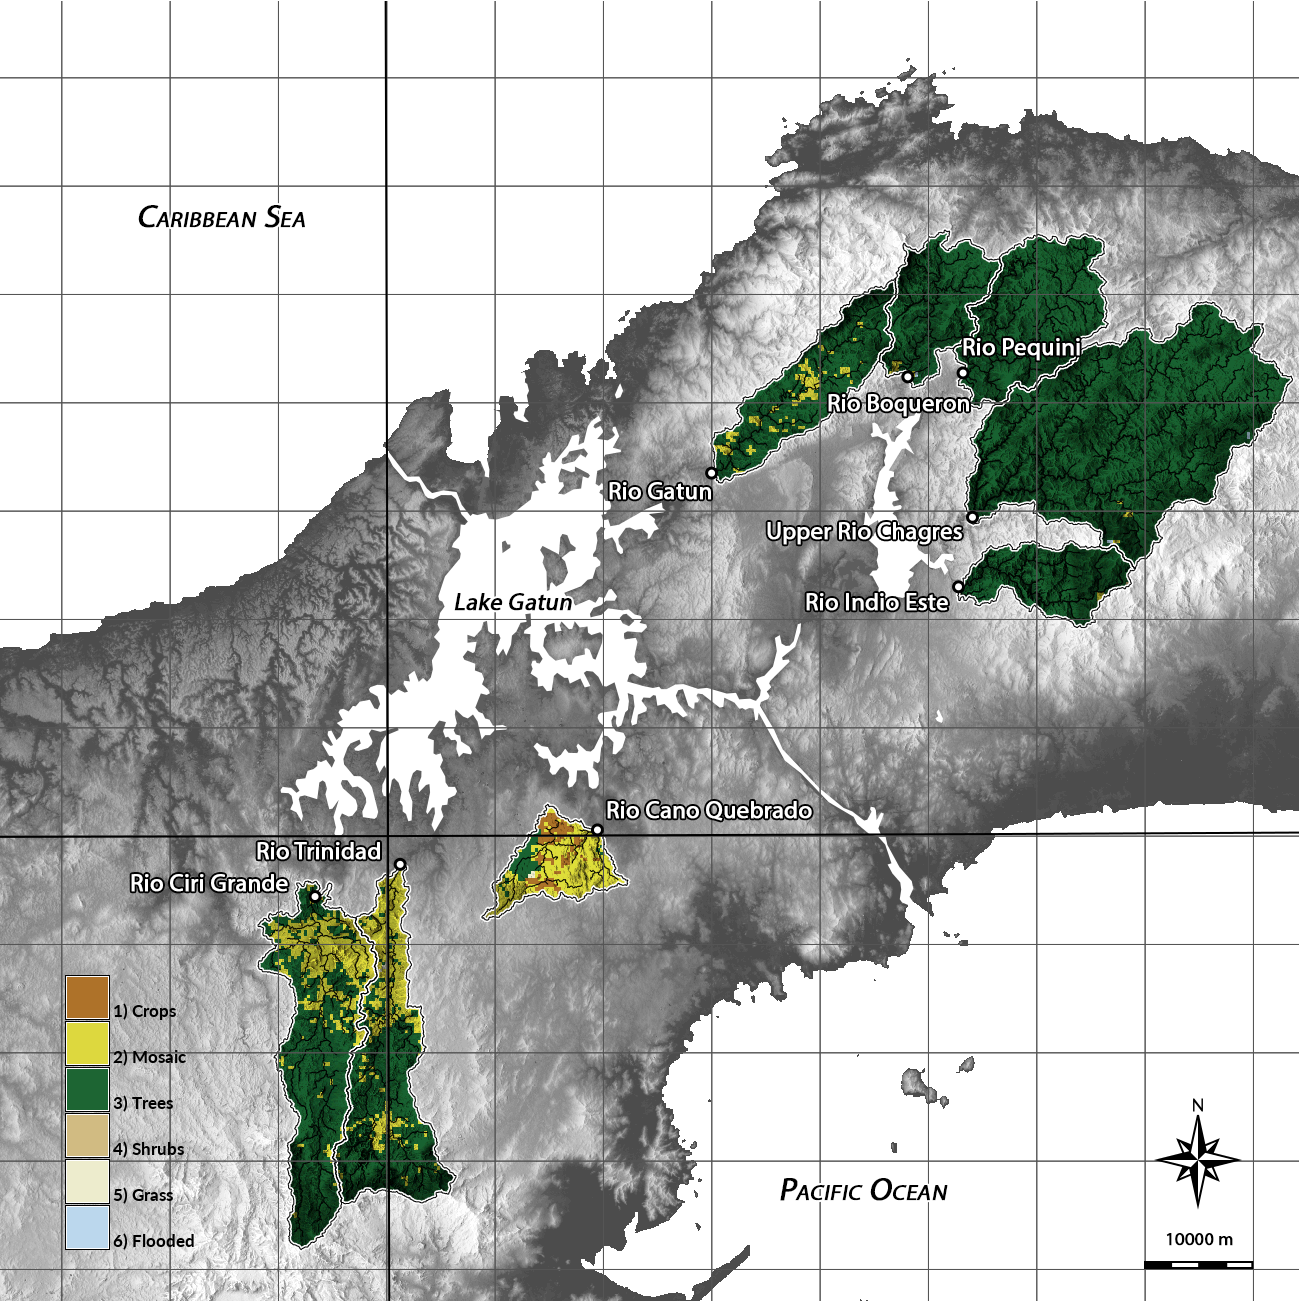 Landcover and river network for the Greater Panama Canal Zone Watershed